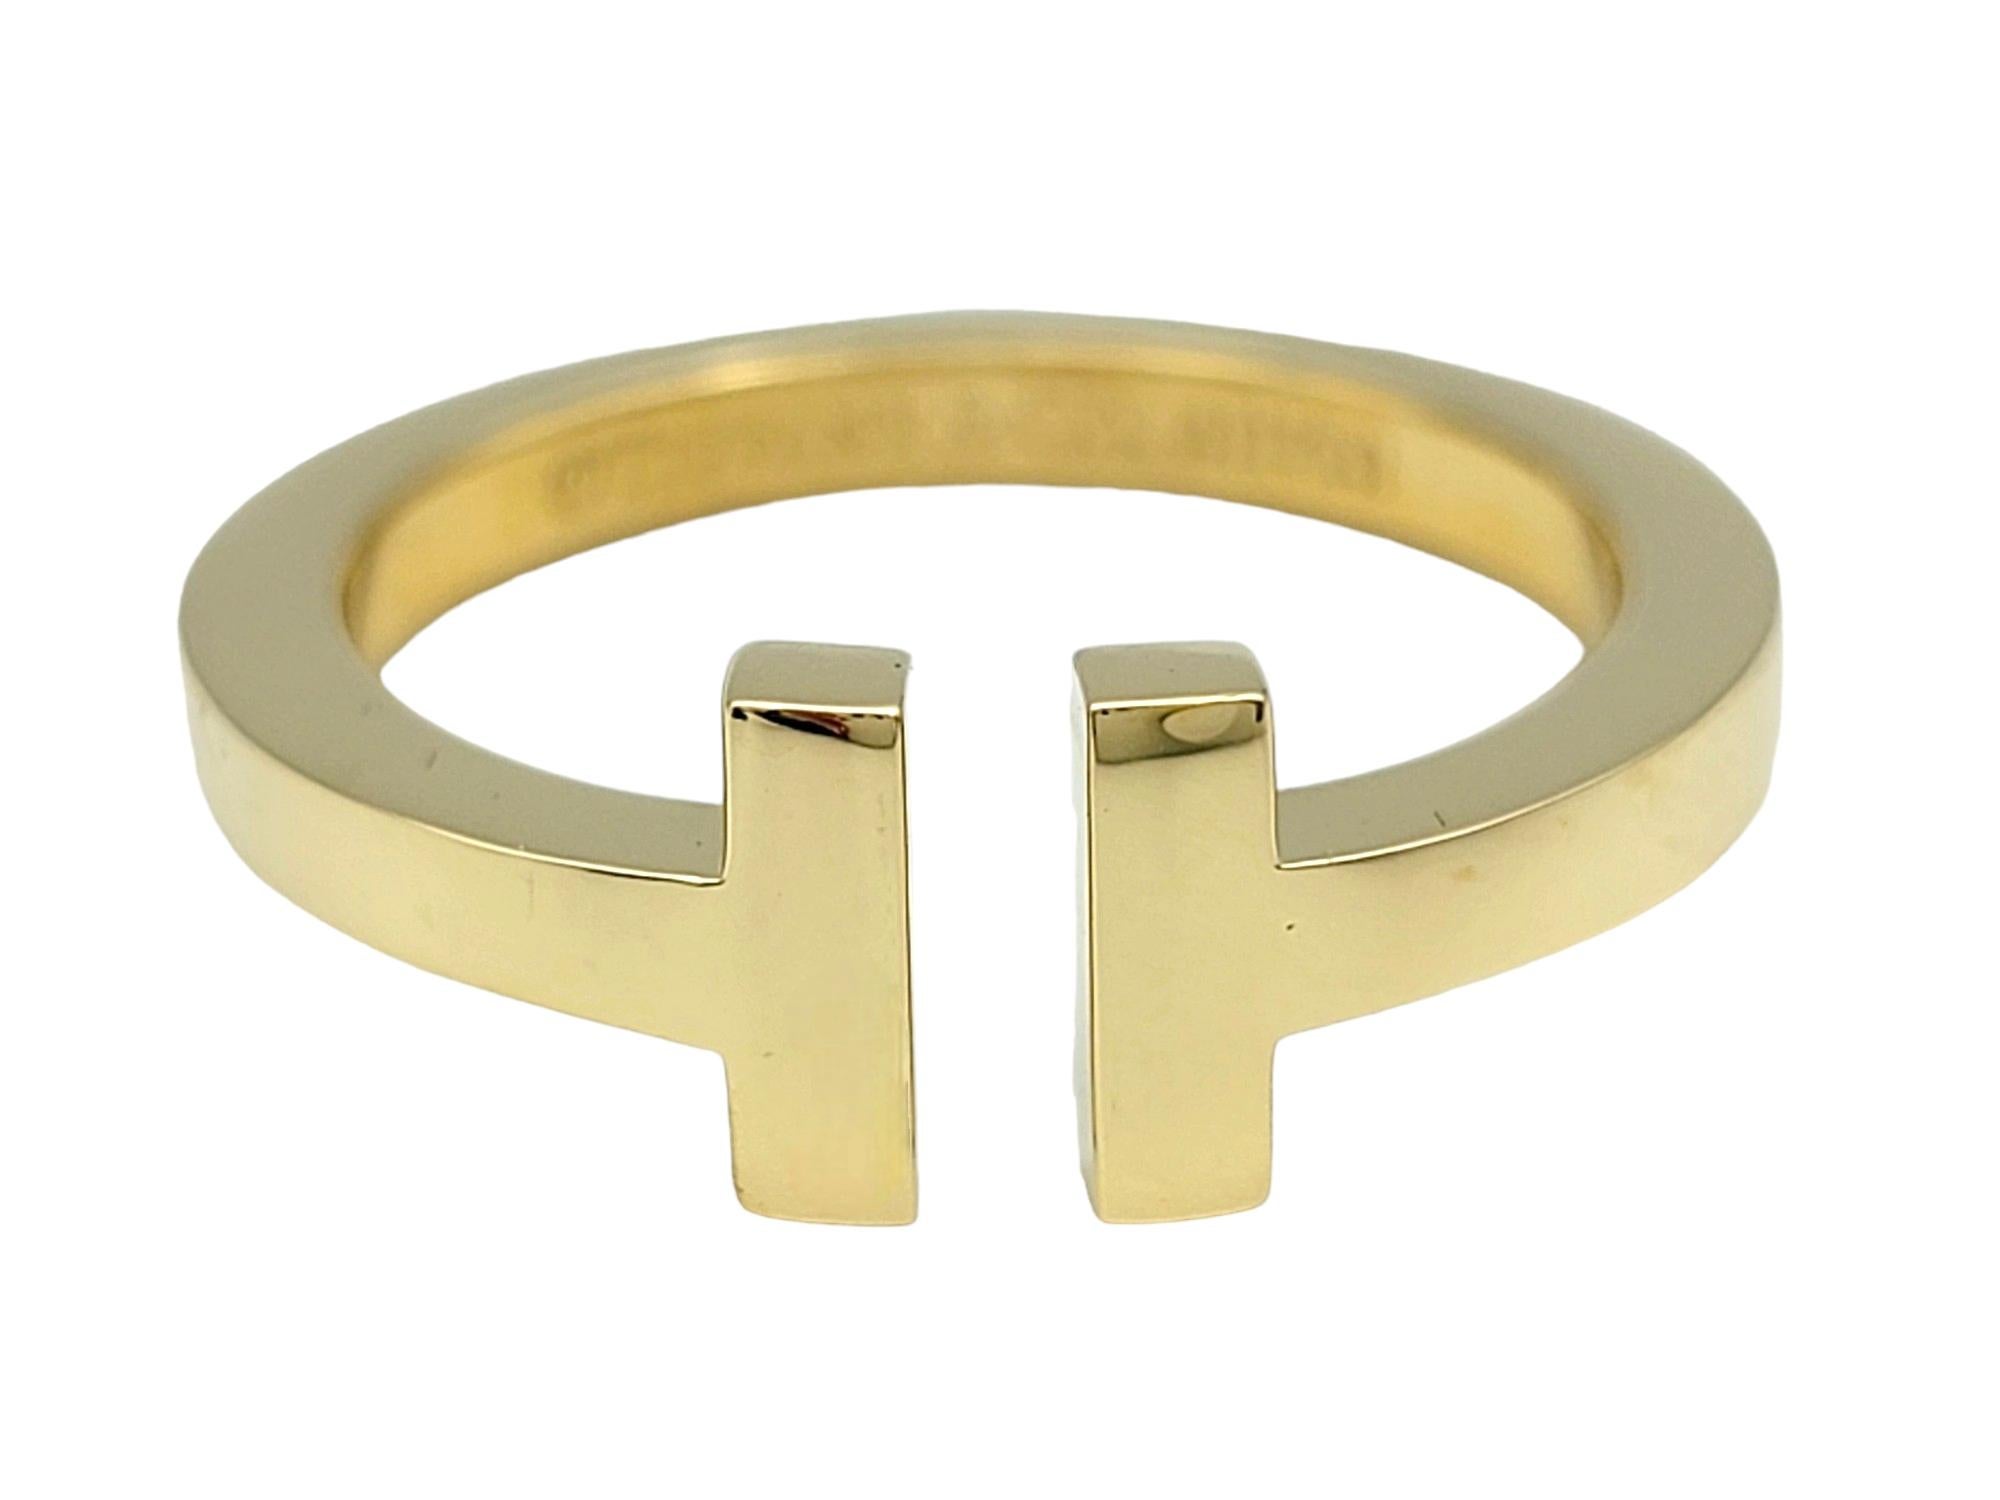 Ring Size: 8.75

Crafted by the renowned Tiffany & Co., this exquisite Tiffany T band ring is a timeless symbol of elegance and sophistication. Meticulously crafted from lustrous 18 karat yellow gold, it boasts a sleek and minimalist design that